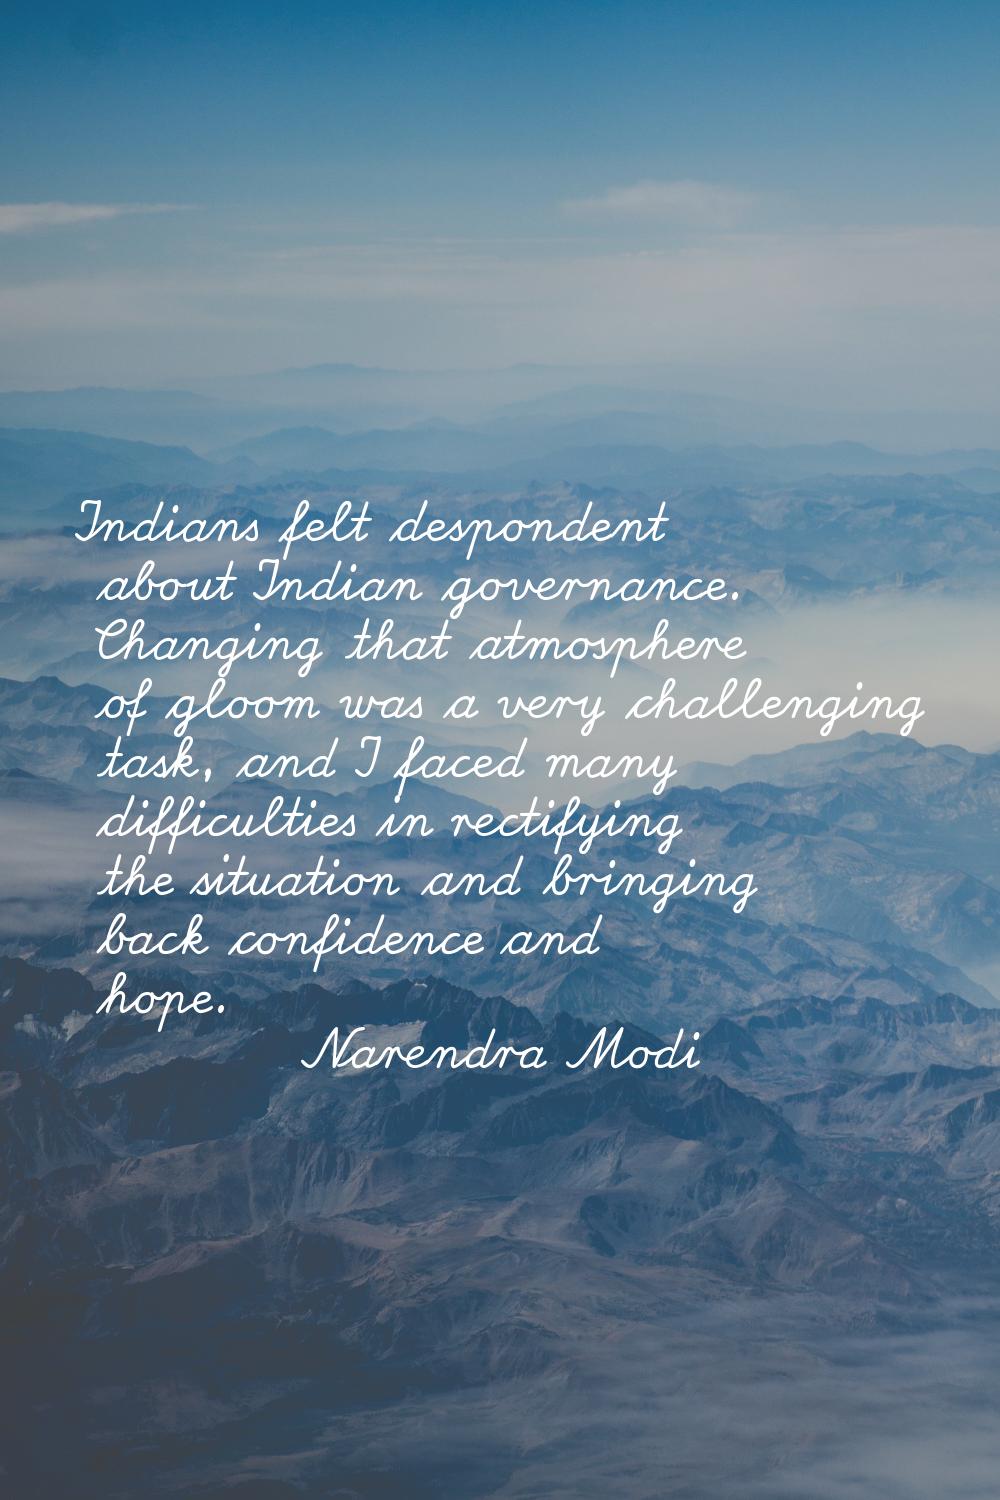 Indians felt despondent about Indian governance. Changing that atmosphere of gloom was a very chall